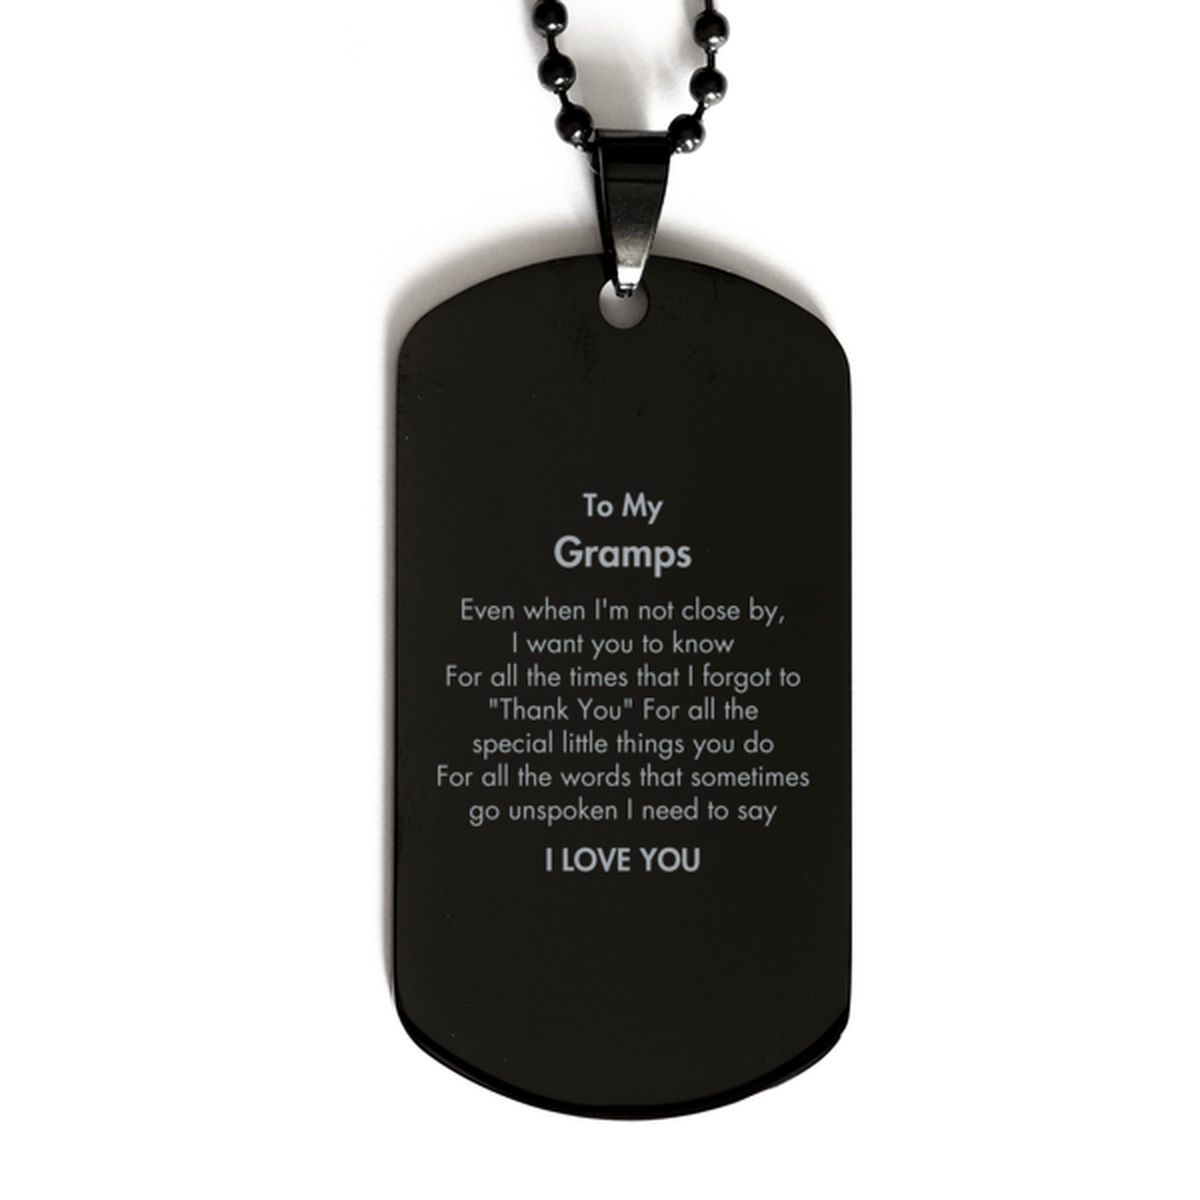 Thank You Gifts for Gramps, Keepsake Black Dog Tag Gifts for Gramps Birthday Mother's day Father's Day Gramps For all the words That sometimes go unspoken I need to say I LOVE YOU